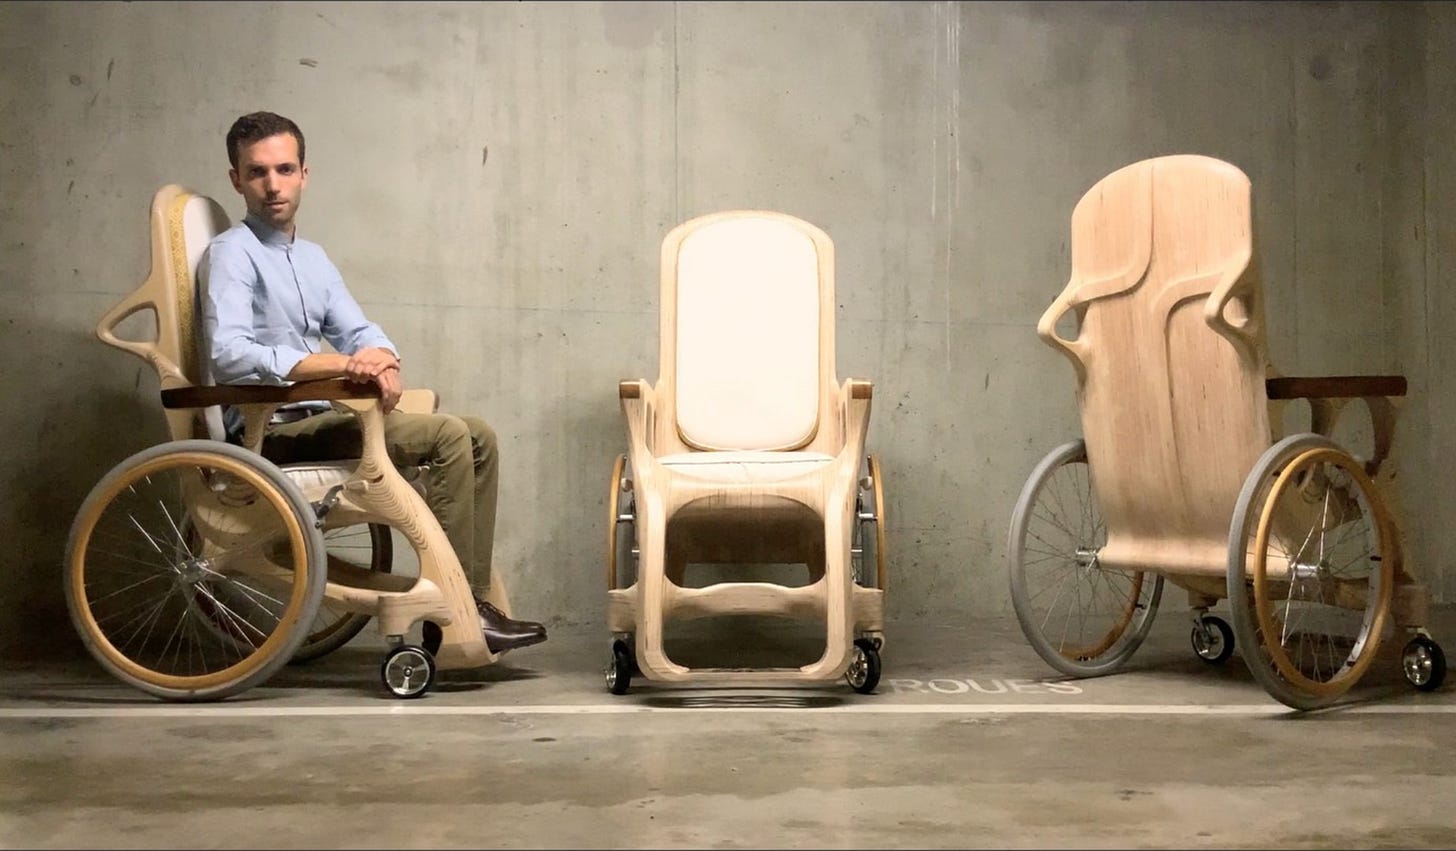 A white disabled designer sits in a wooden wheelchair, with images of the chair from 3 angles.